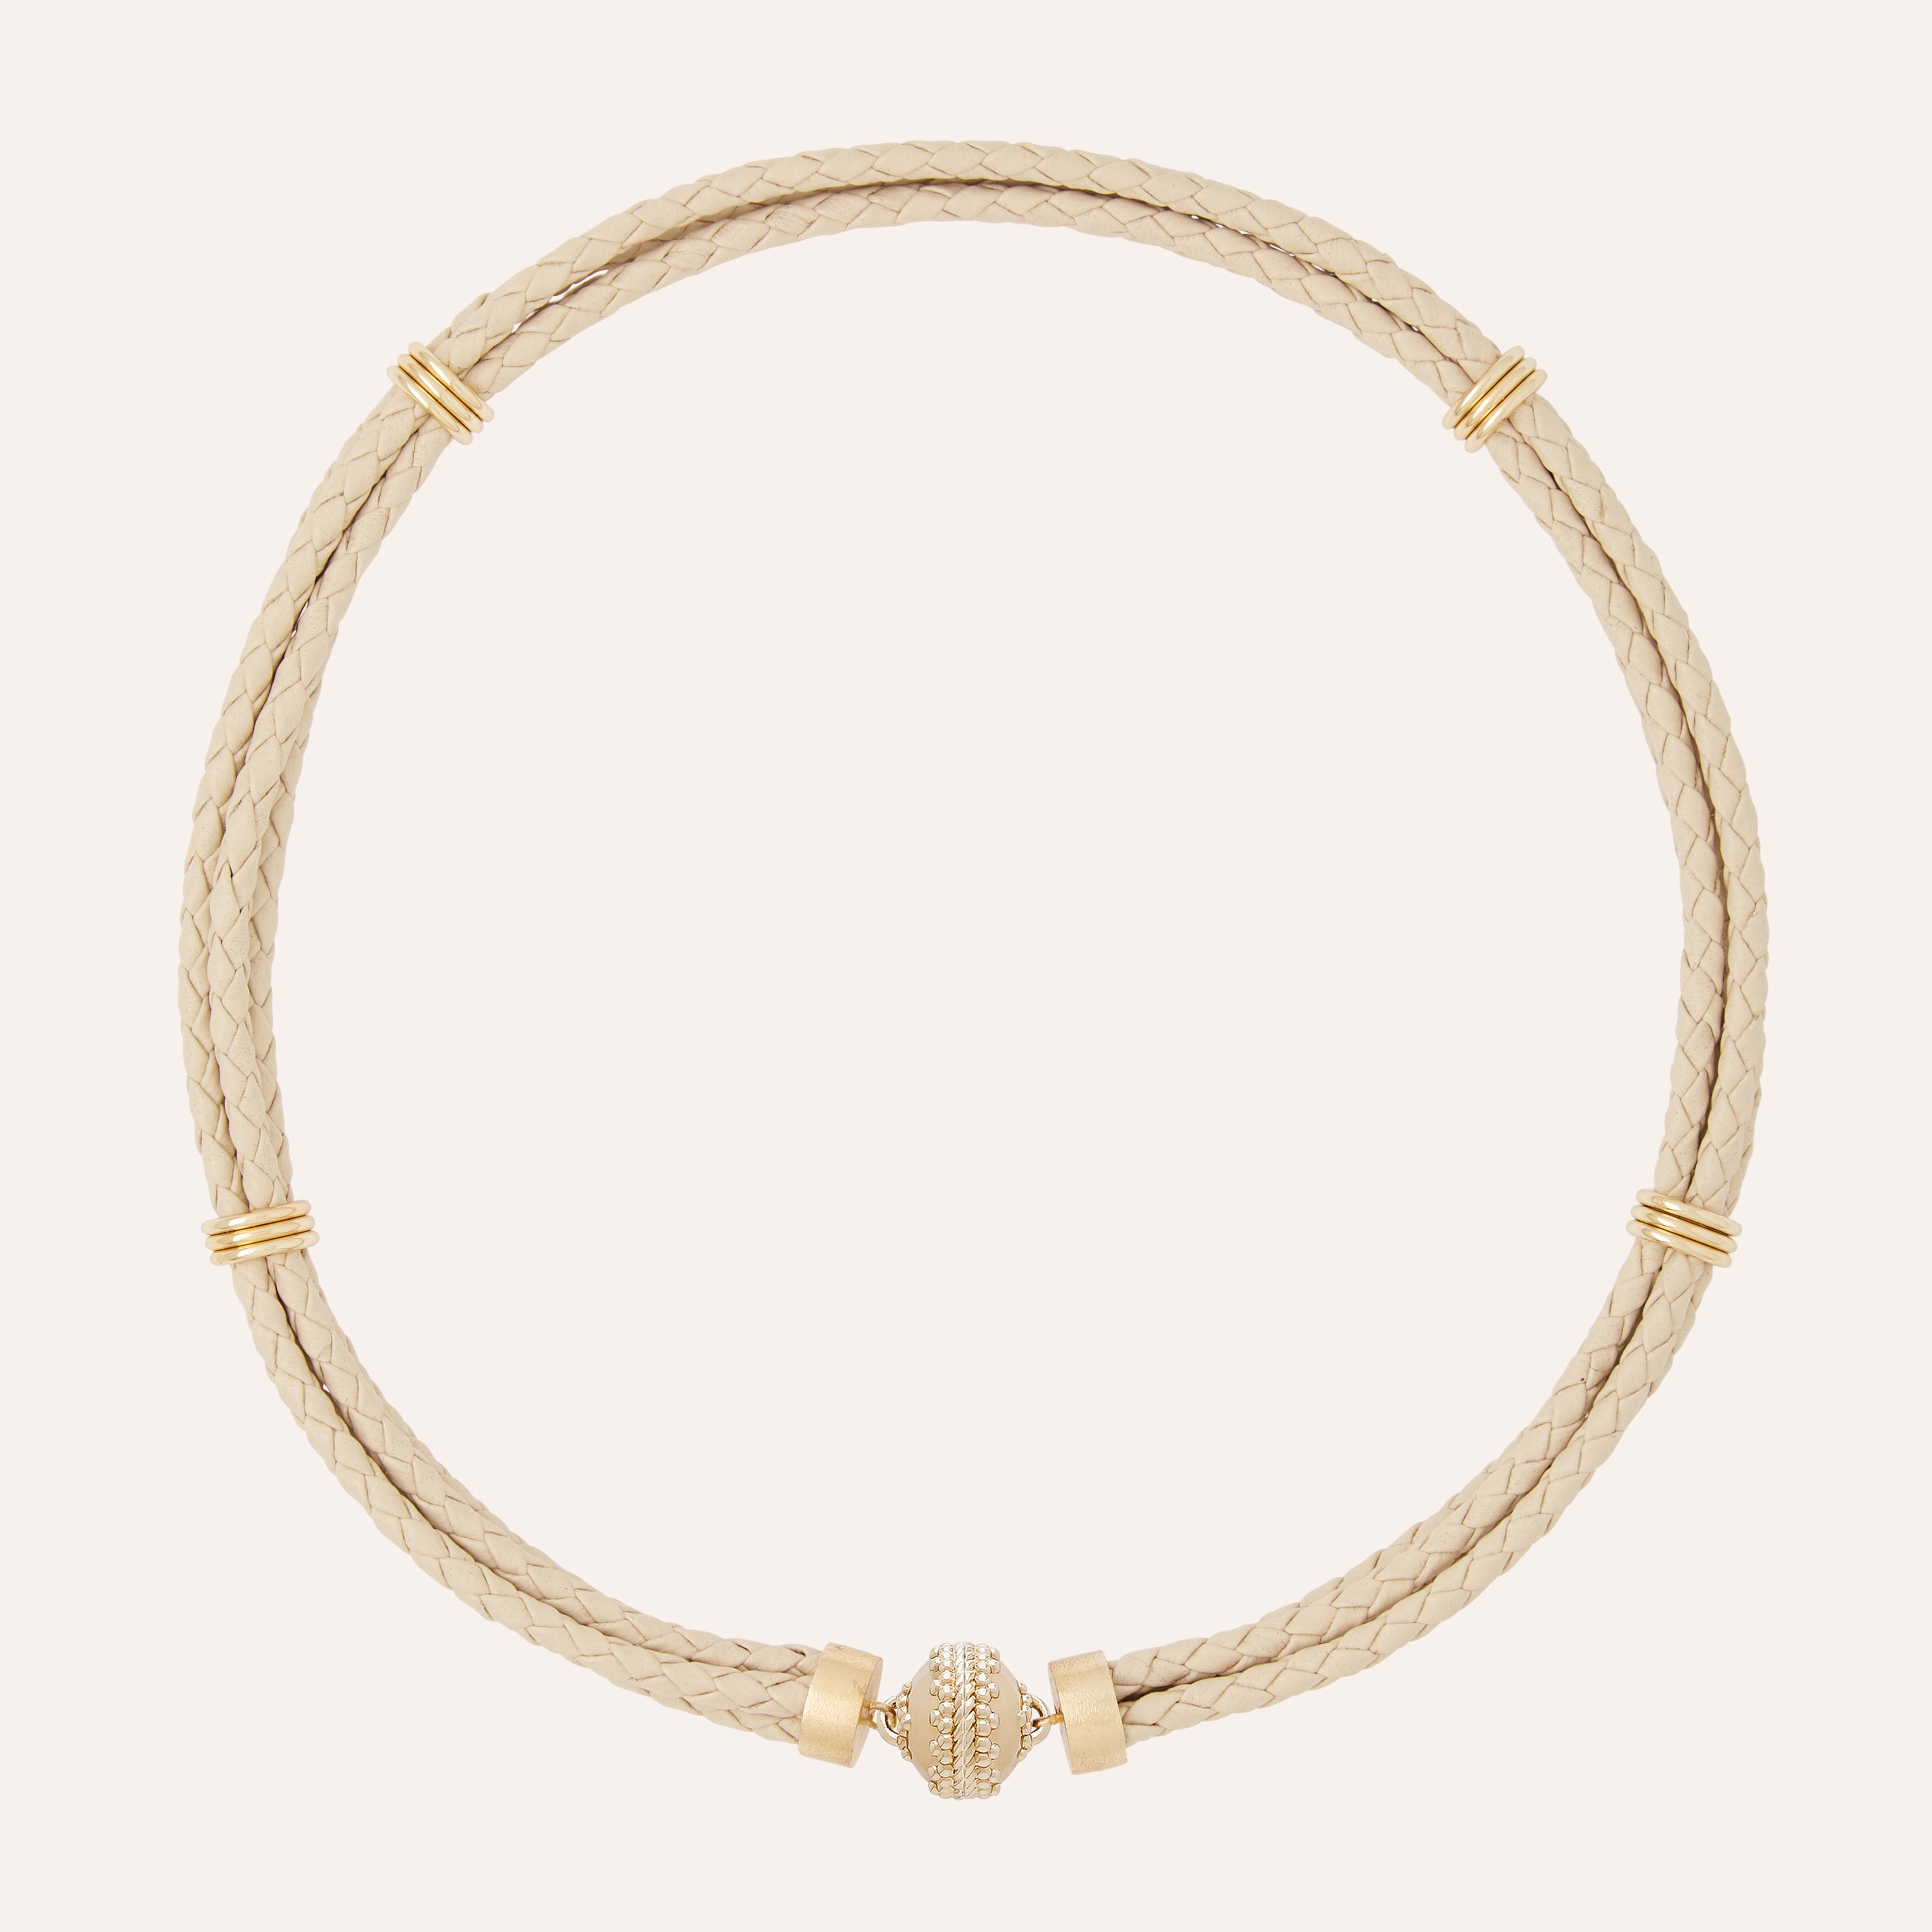 Aspen Braided Leather Beige Necklace